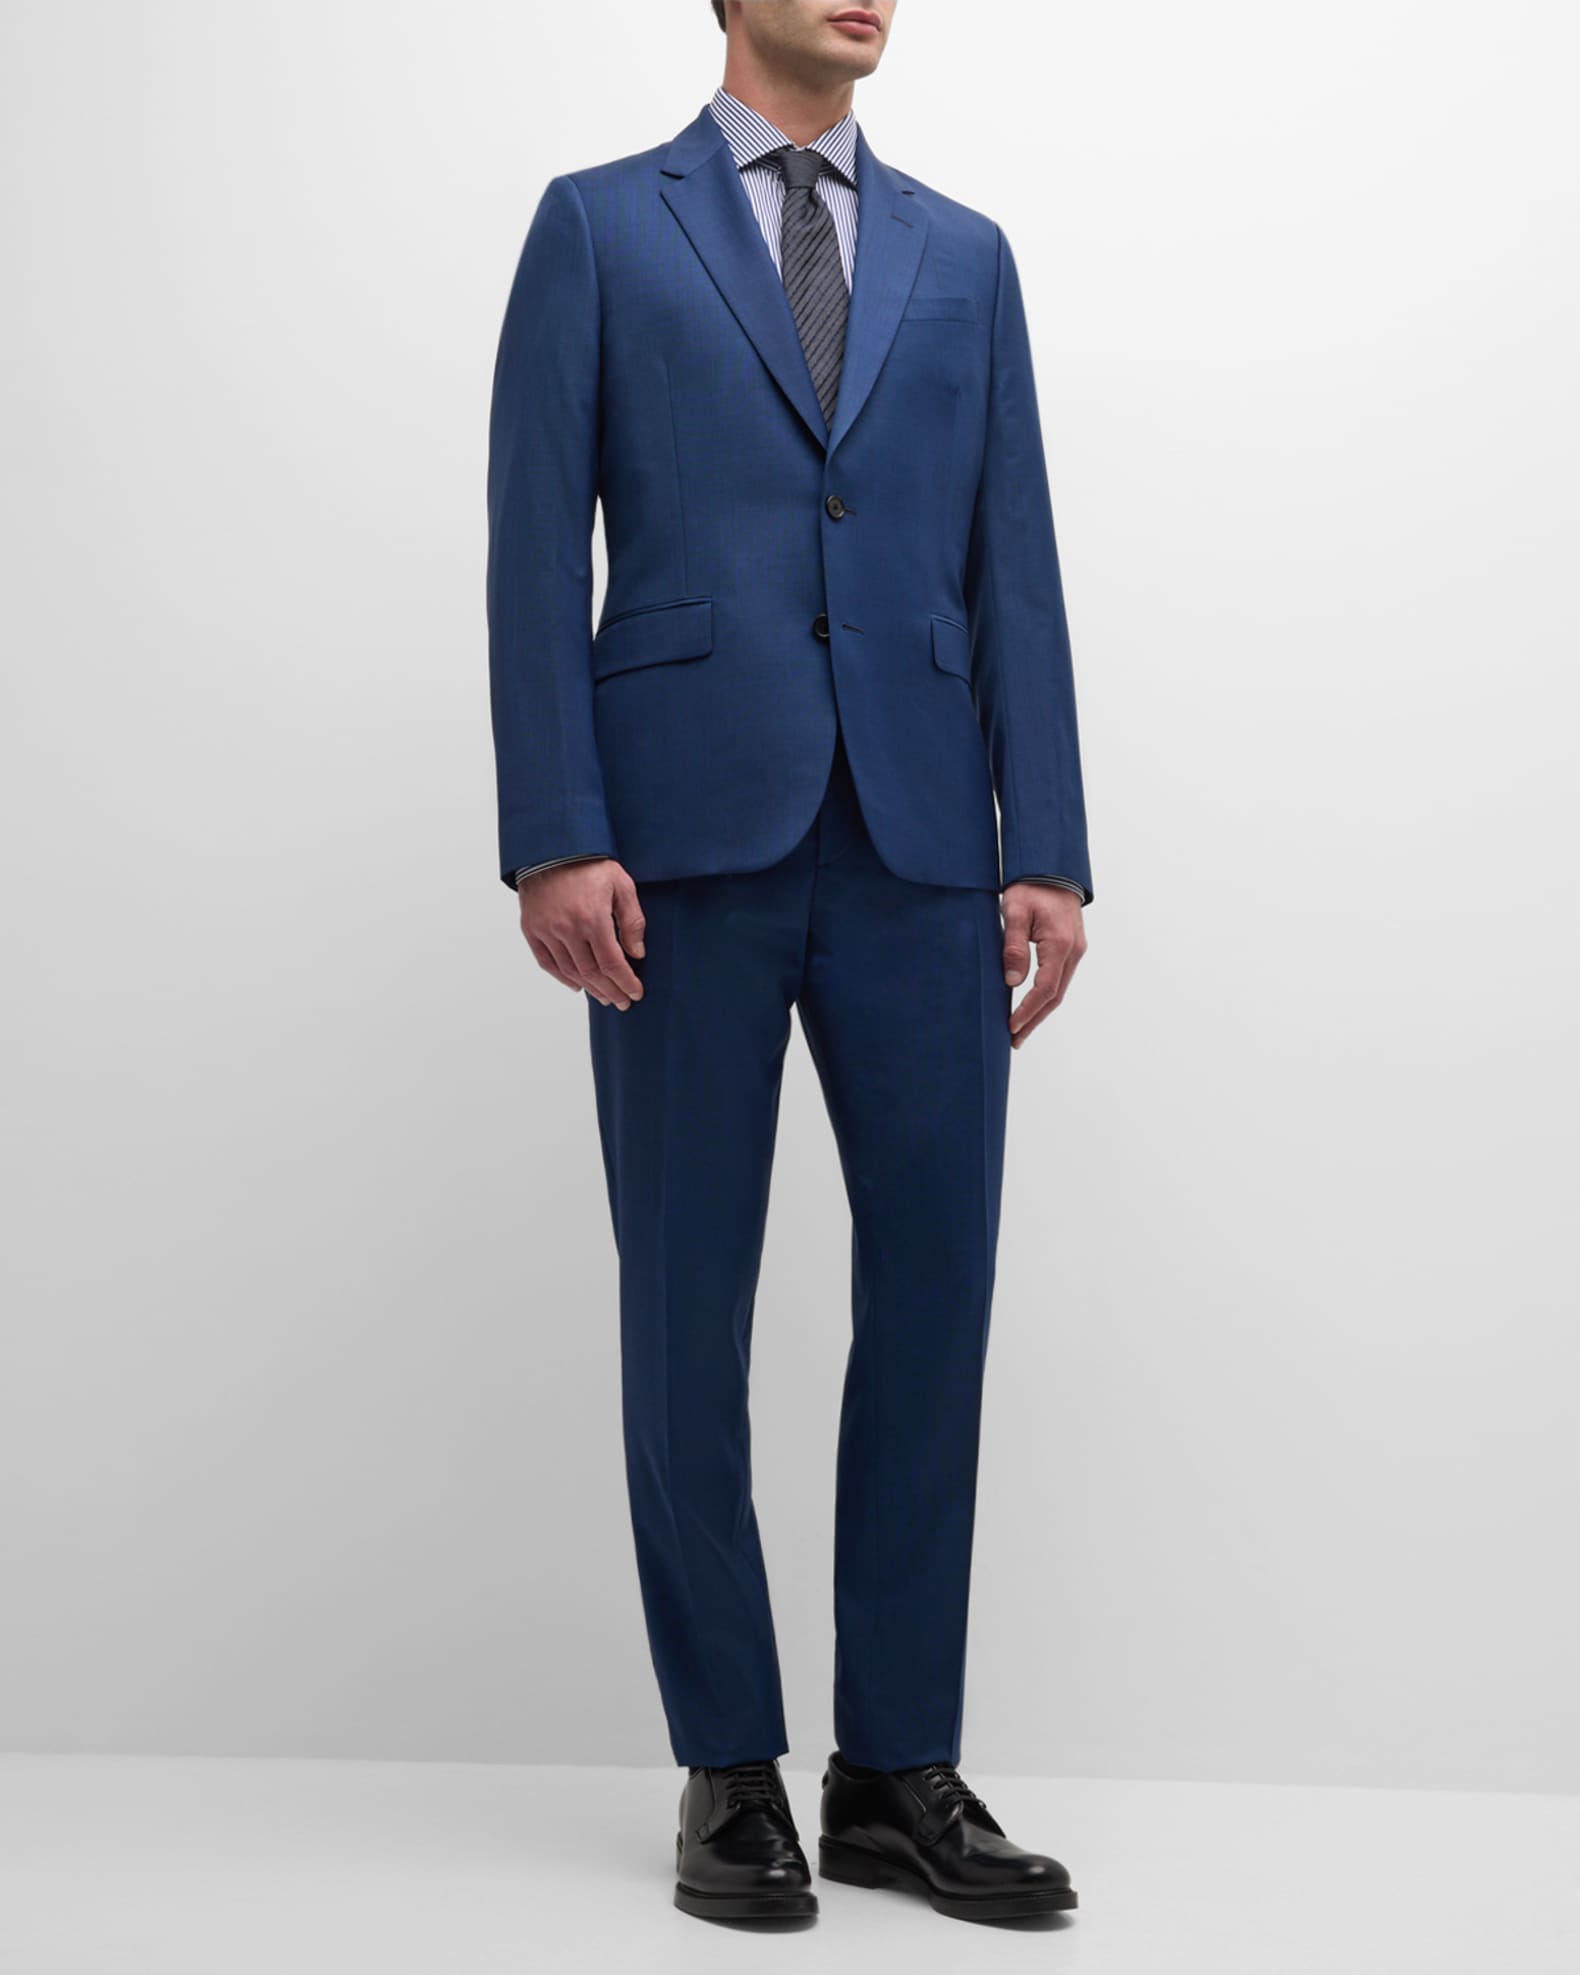 Paul Smith Men's Tailored Fit Wool Two-Button Suit | Neiman Marcus